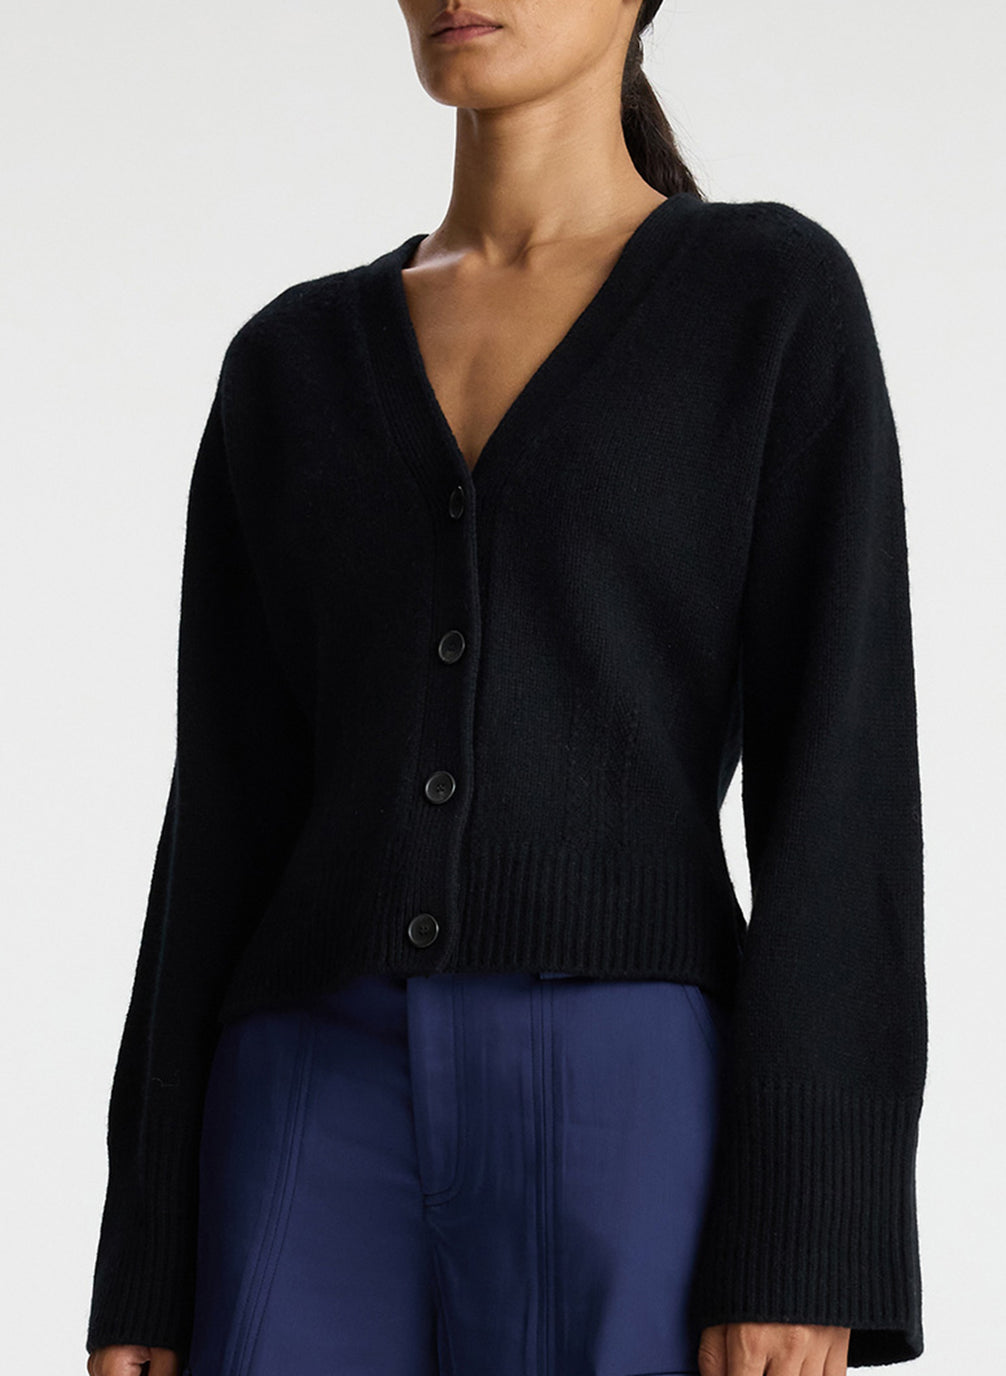 side view of woman wearing black cardigan with navy blue cargo pants